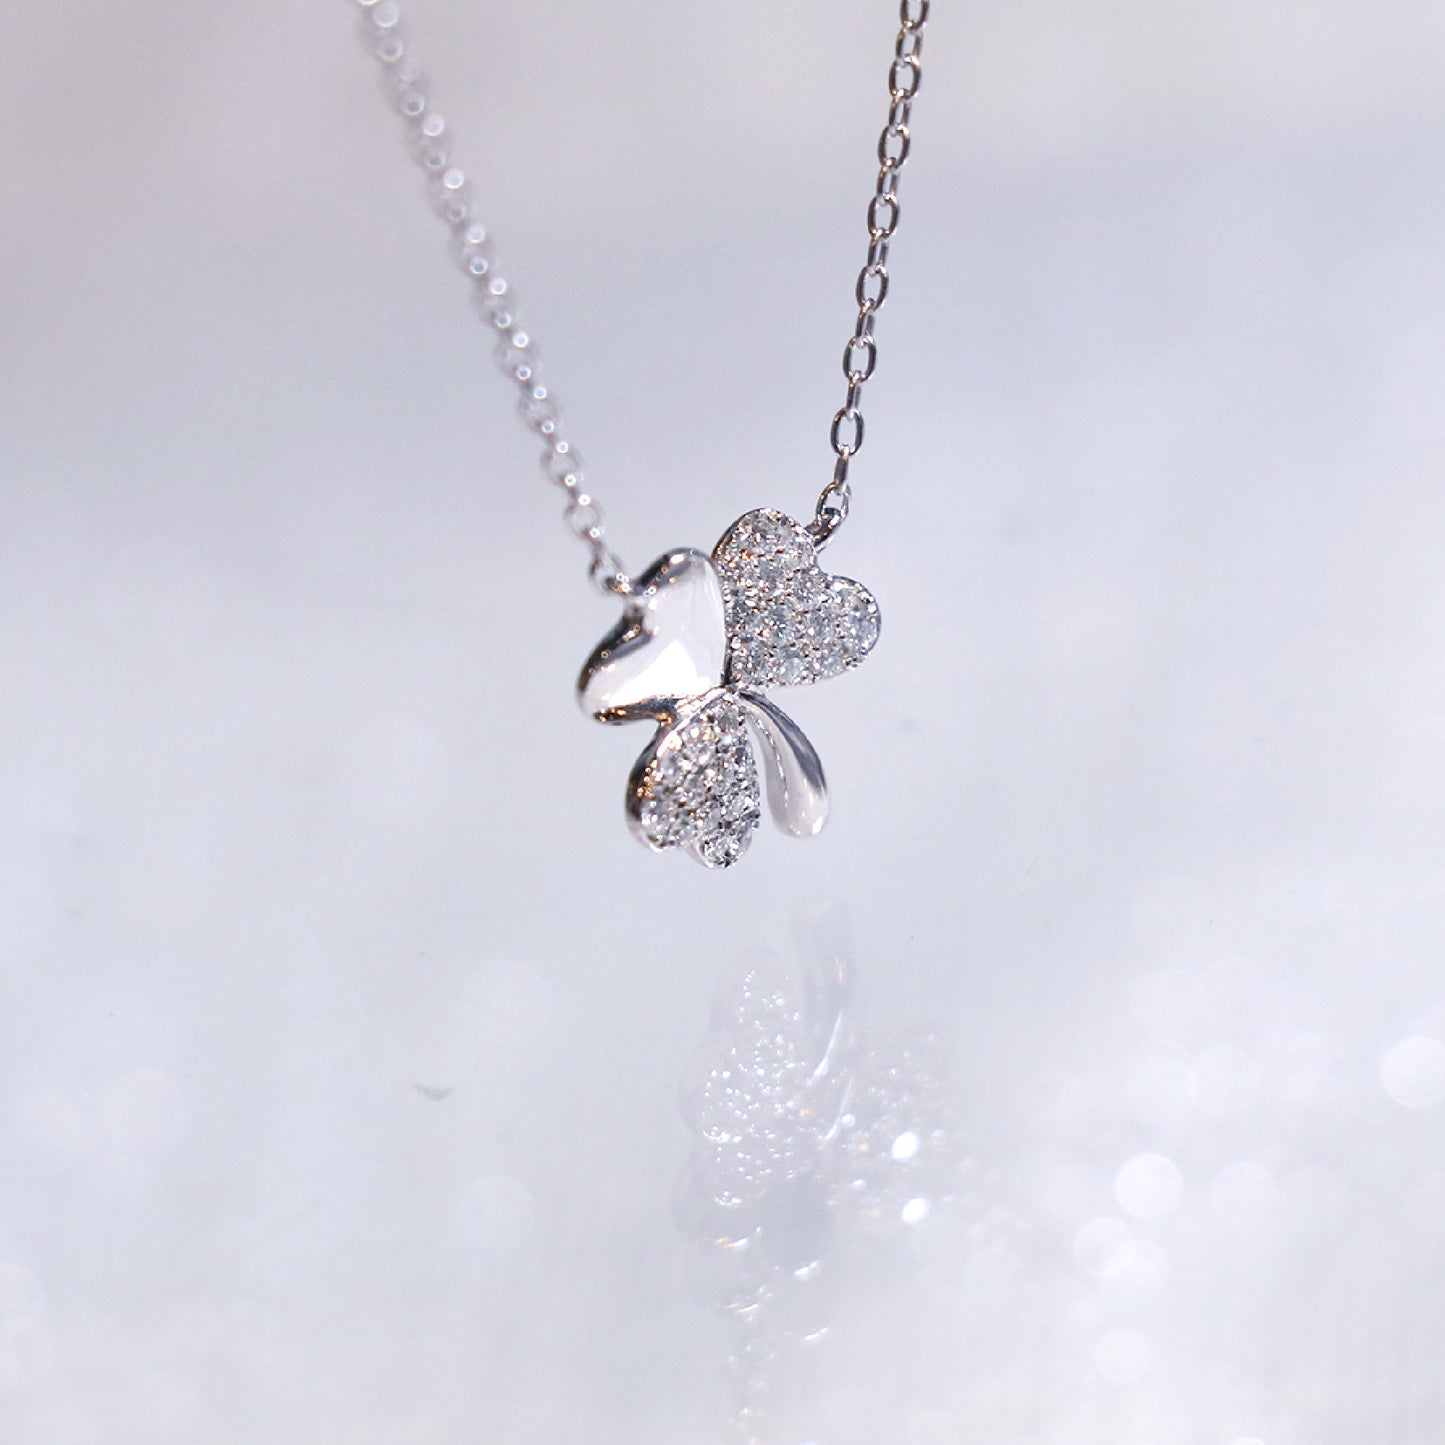 Three Leaf Clover Necklace